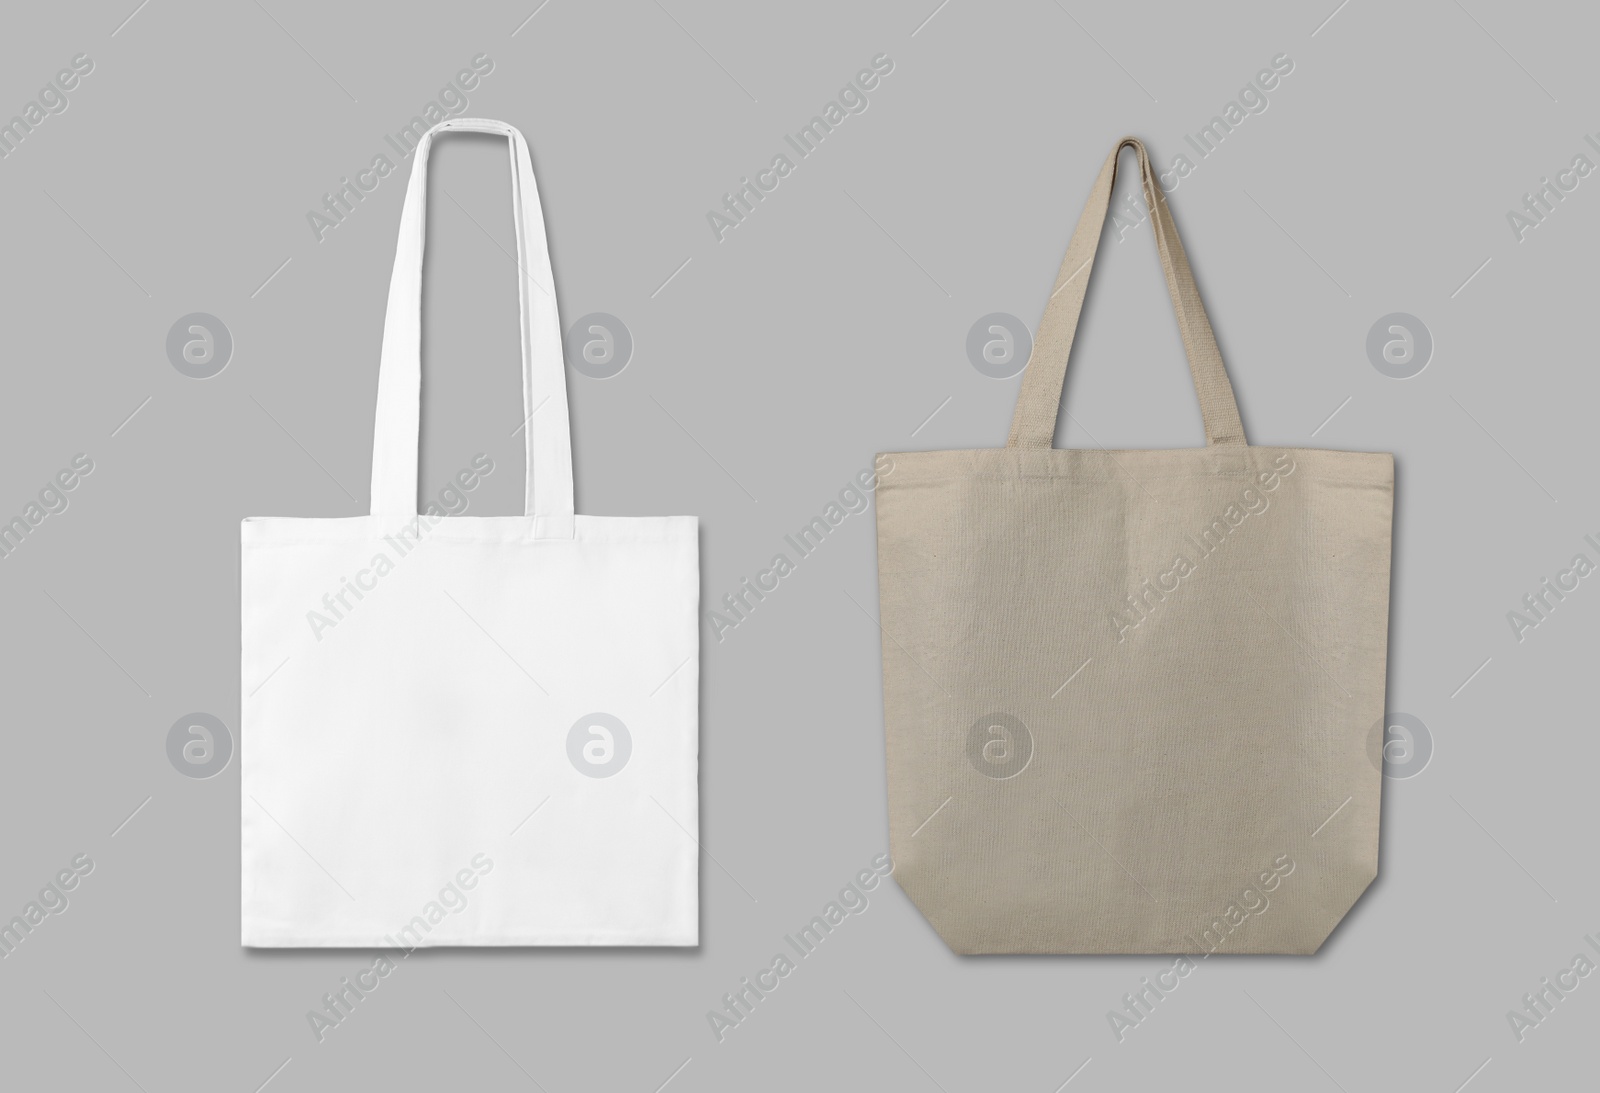 Image of Textile eco bags on light grey background, collage. Mock up for design